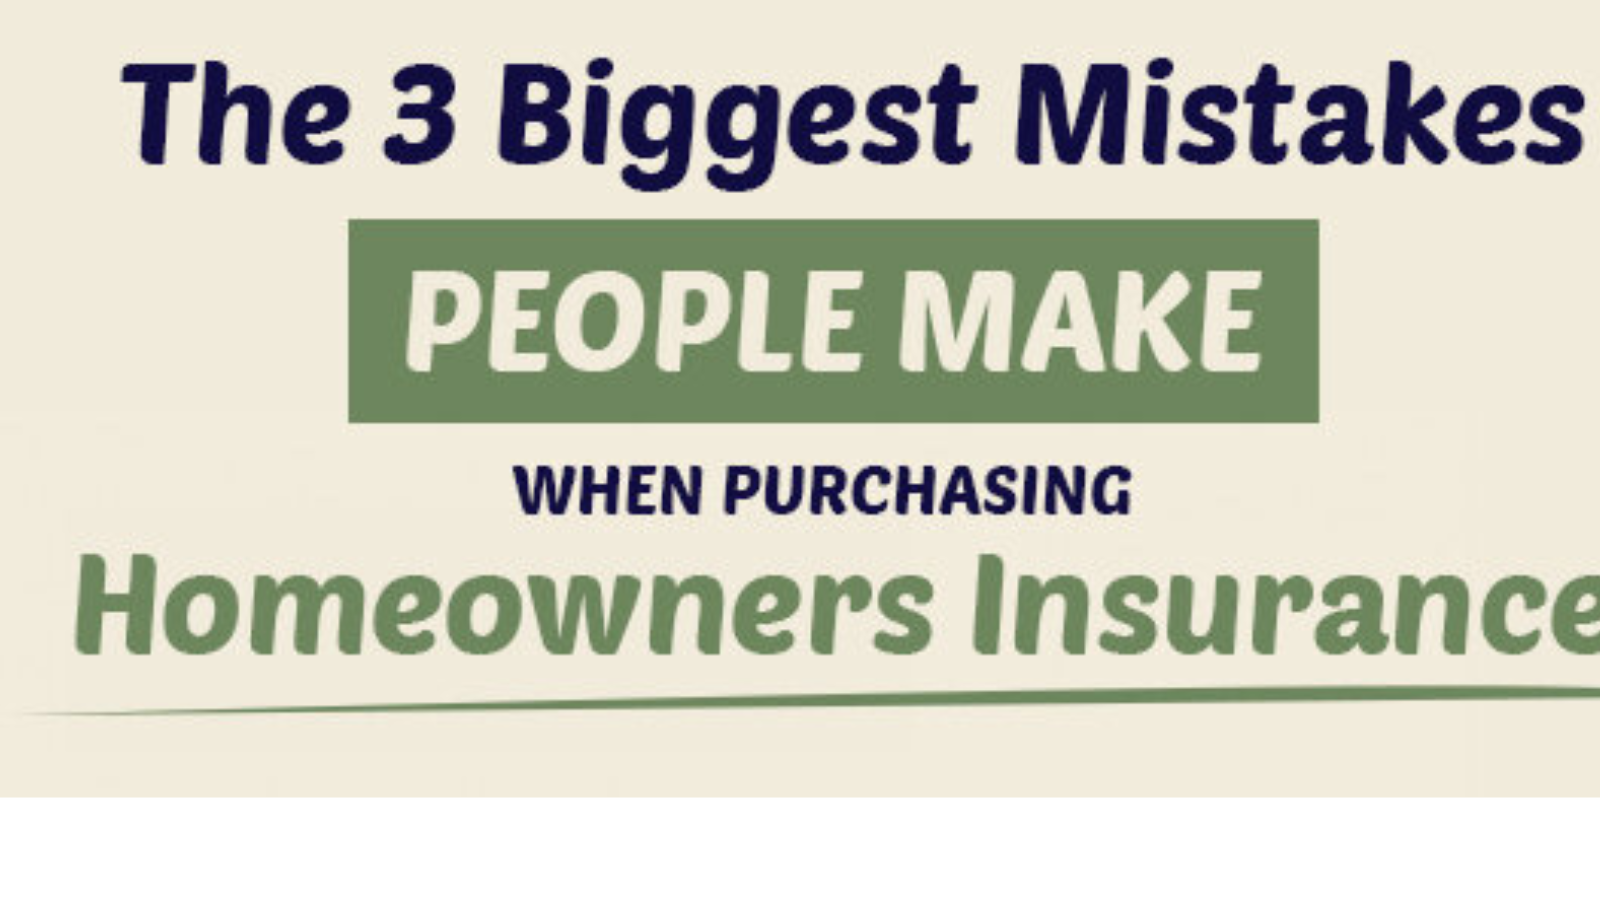 Beware Of These 3 Home Insurance Purchasing Mistakes!